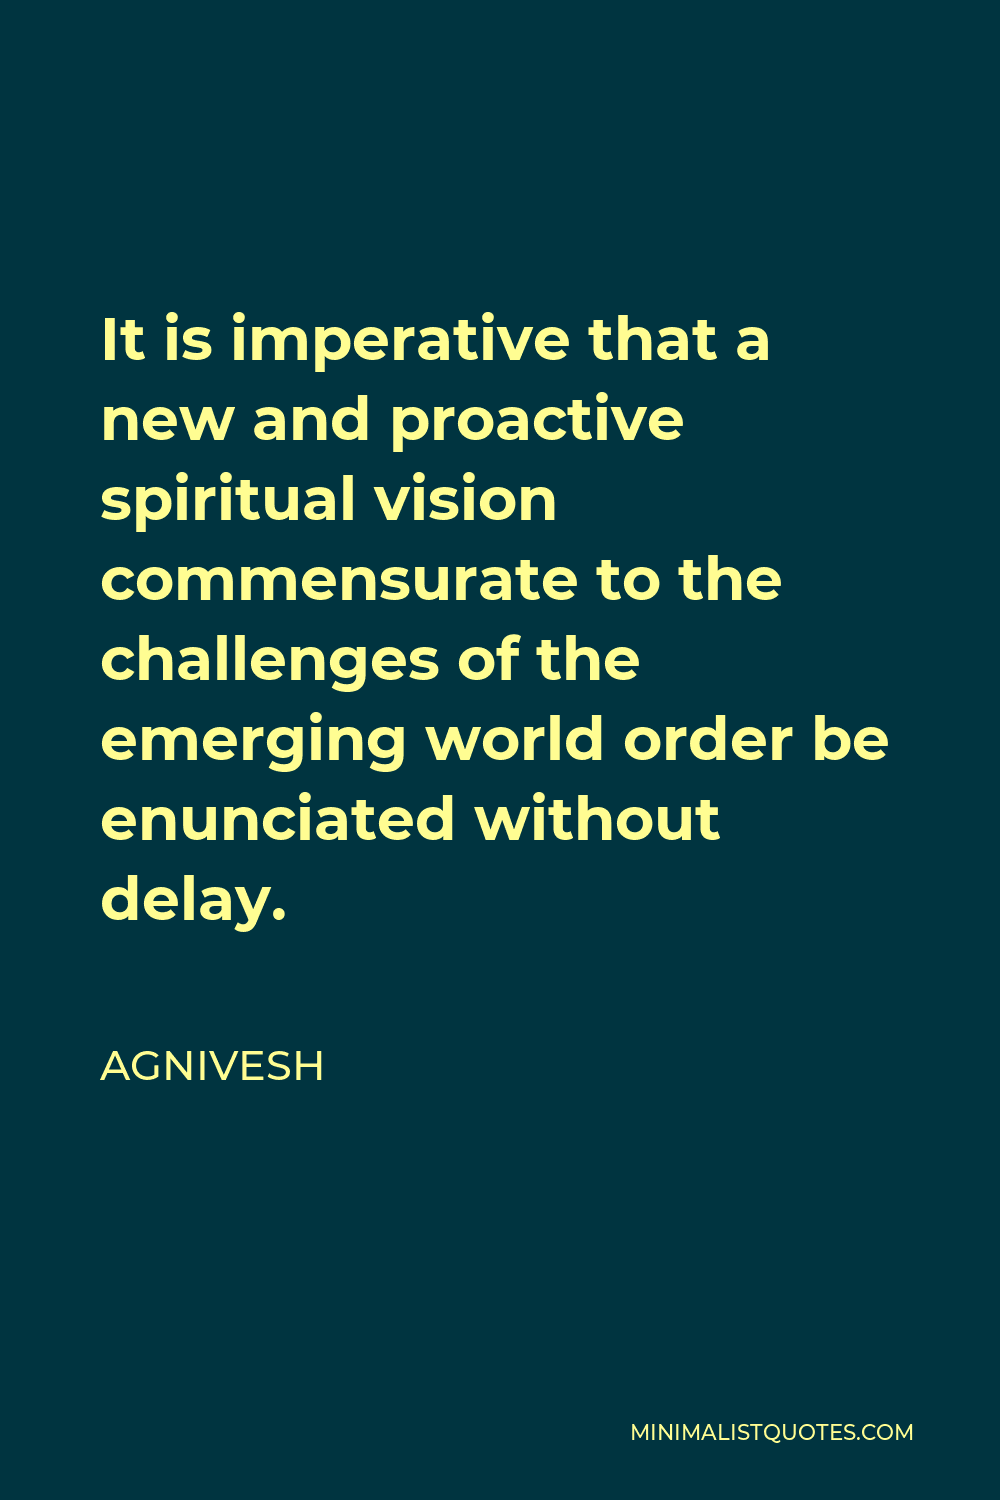 Agnivesh Quote - It is imperative that a new and proactive spiritual vision commensurate to the challenges of the emerging world order be enunciated without delay.